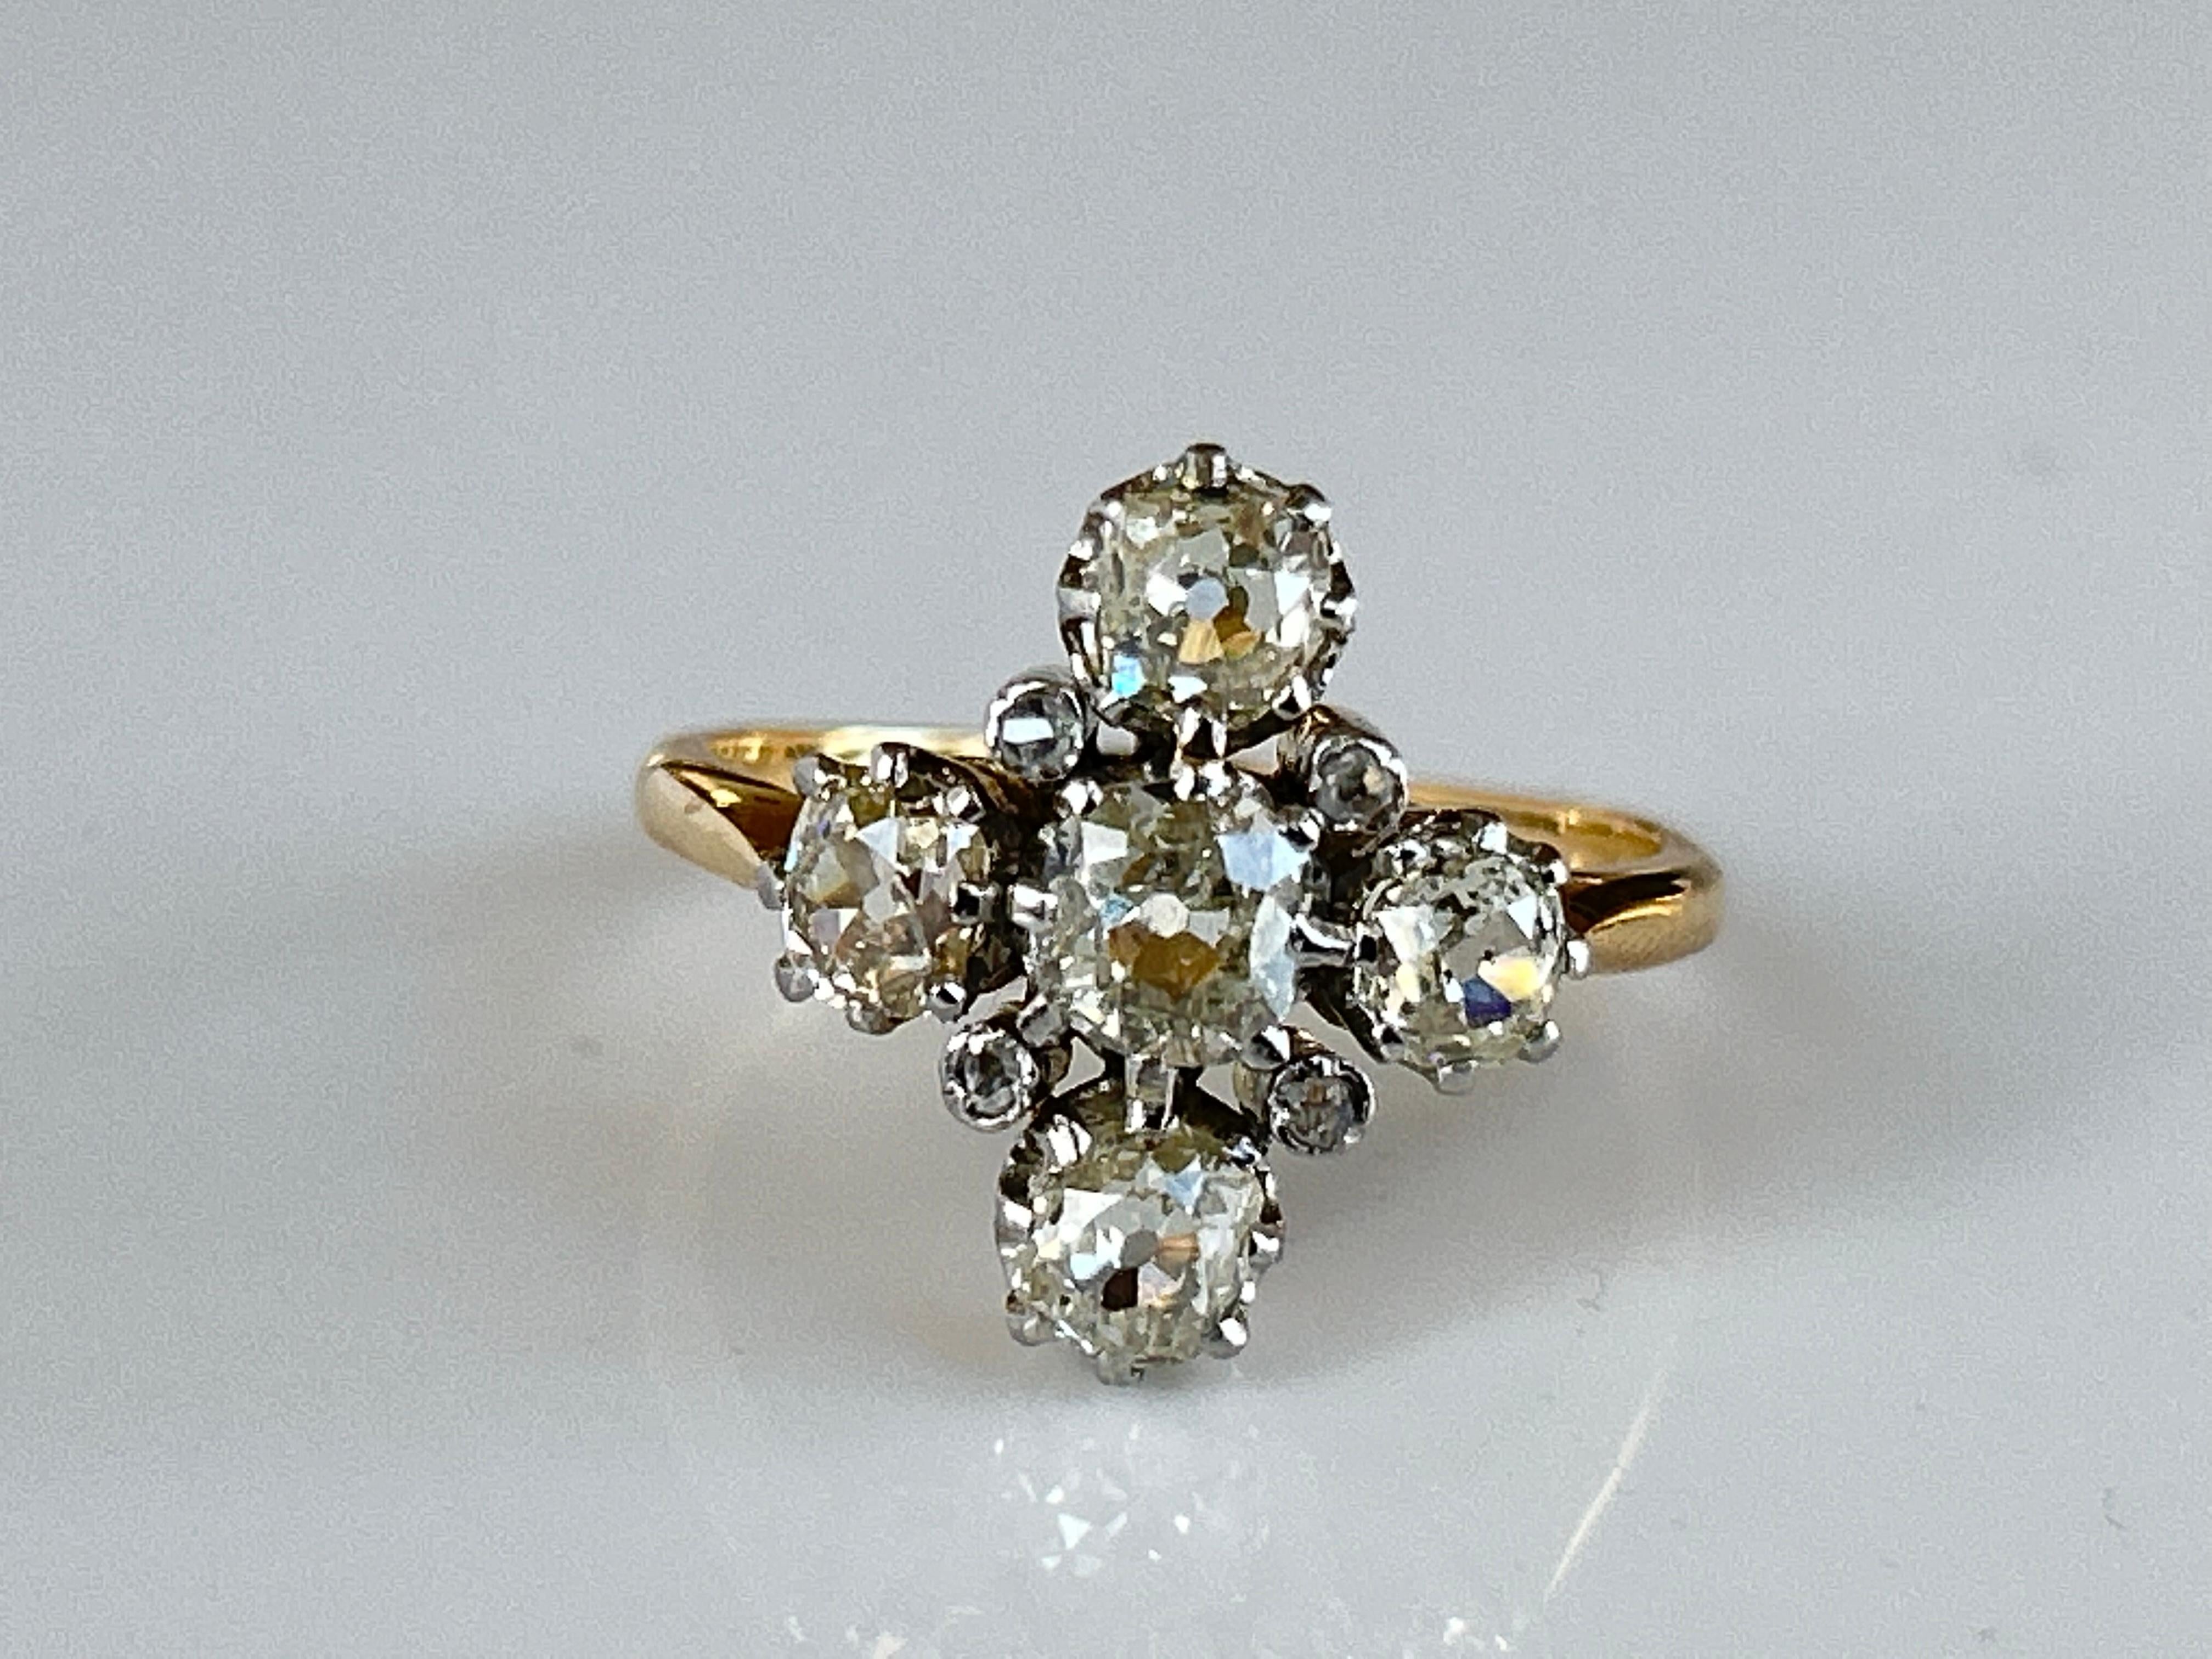 Victorian 2 ct Old Mine Cut Diamond Engagement Ring 18k Gold & Plat For Sale 2